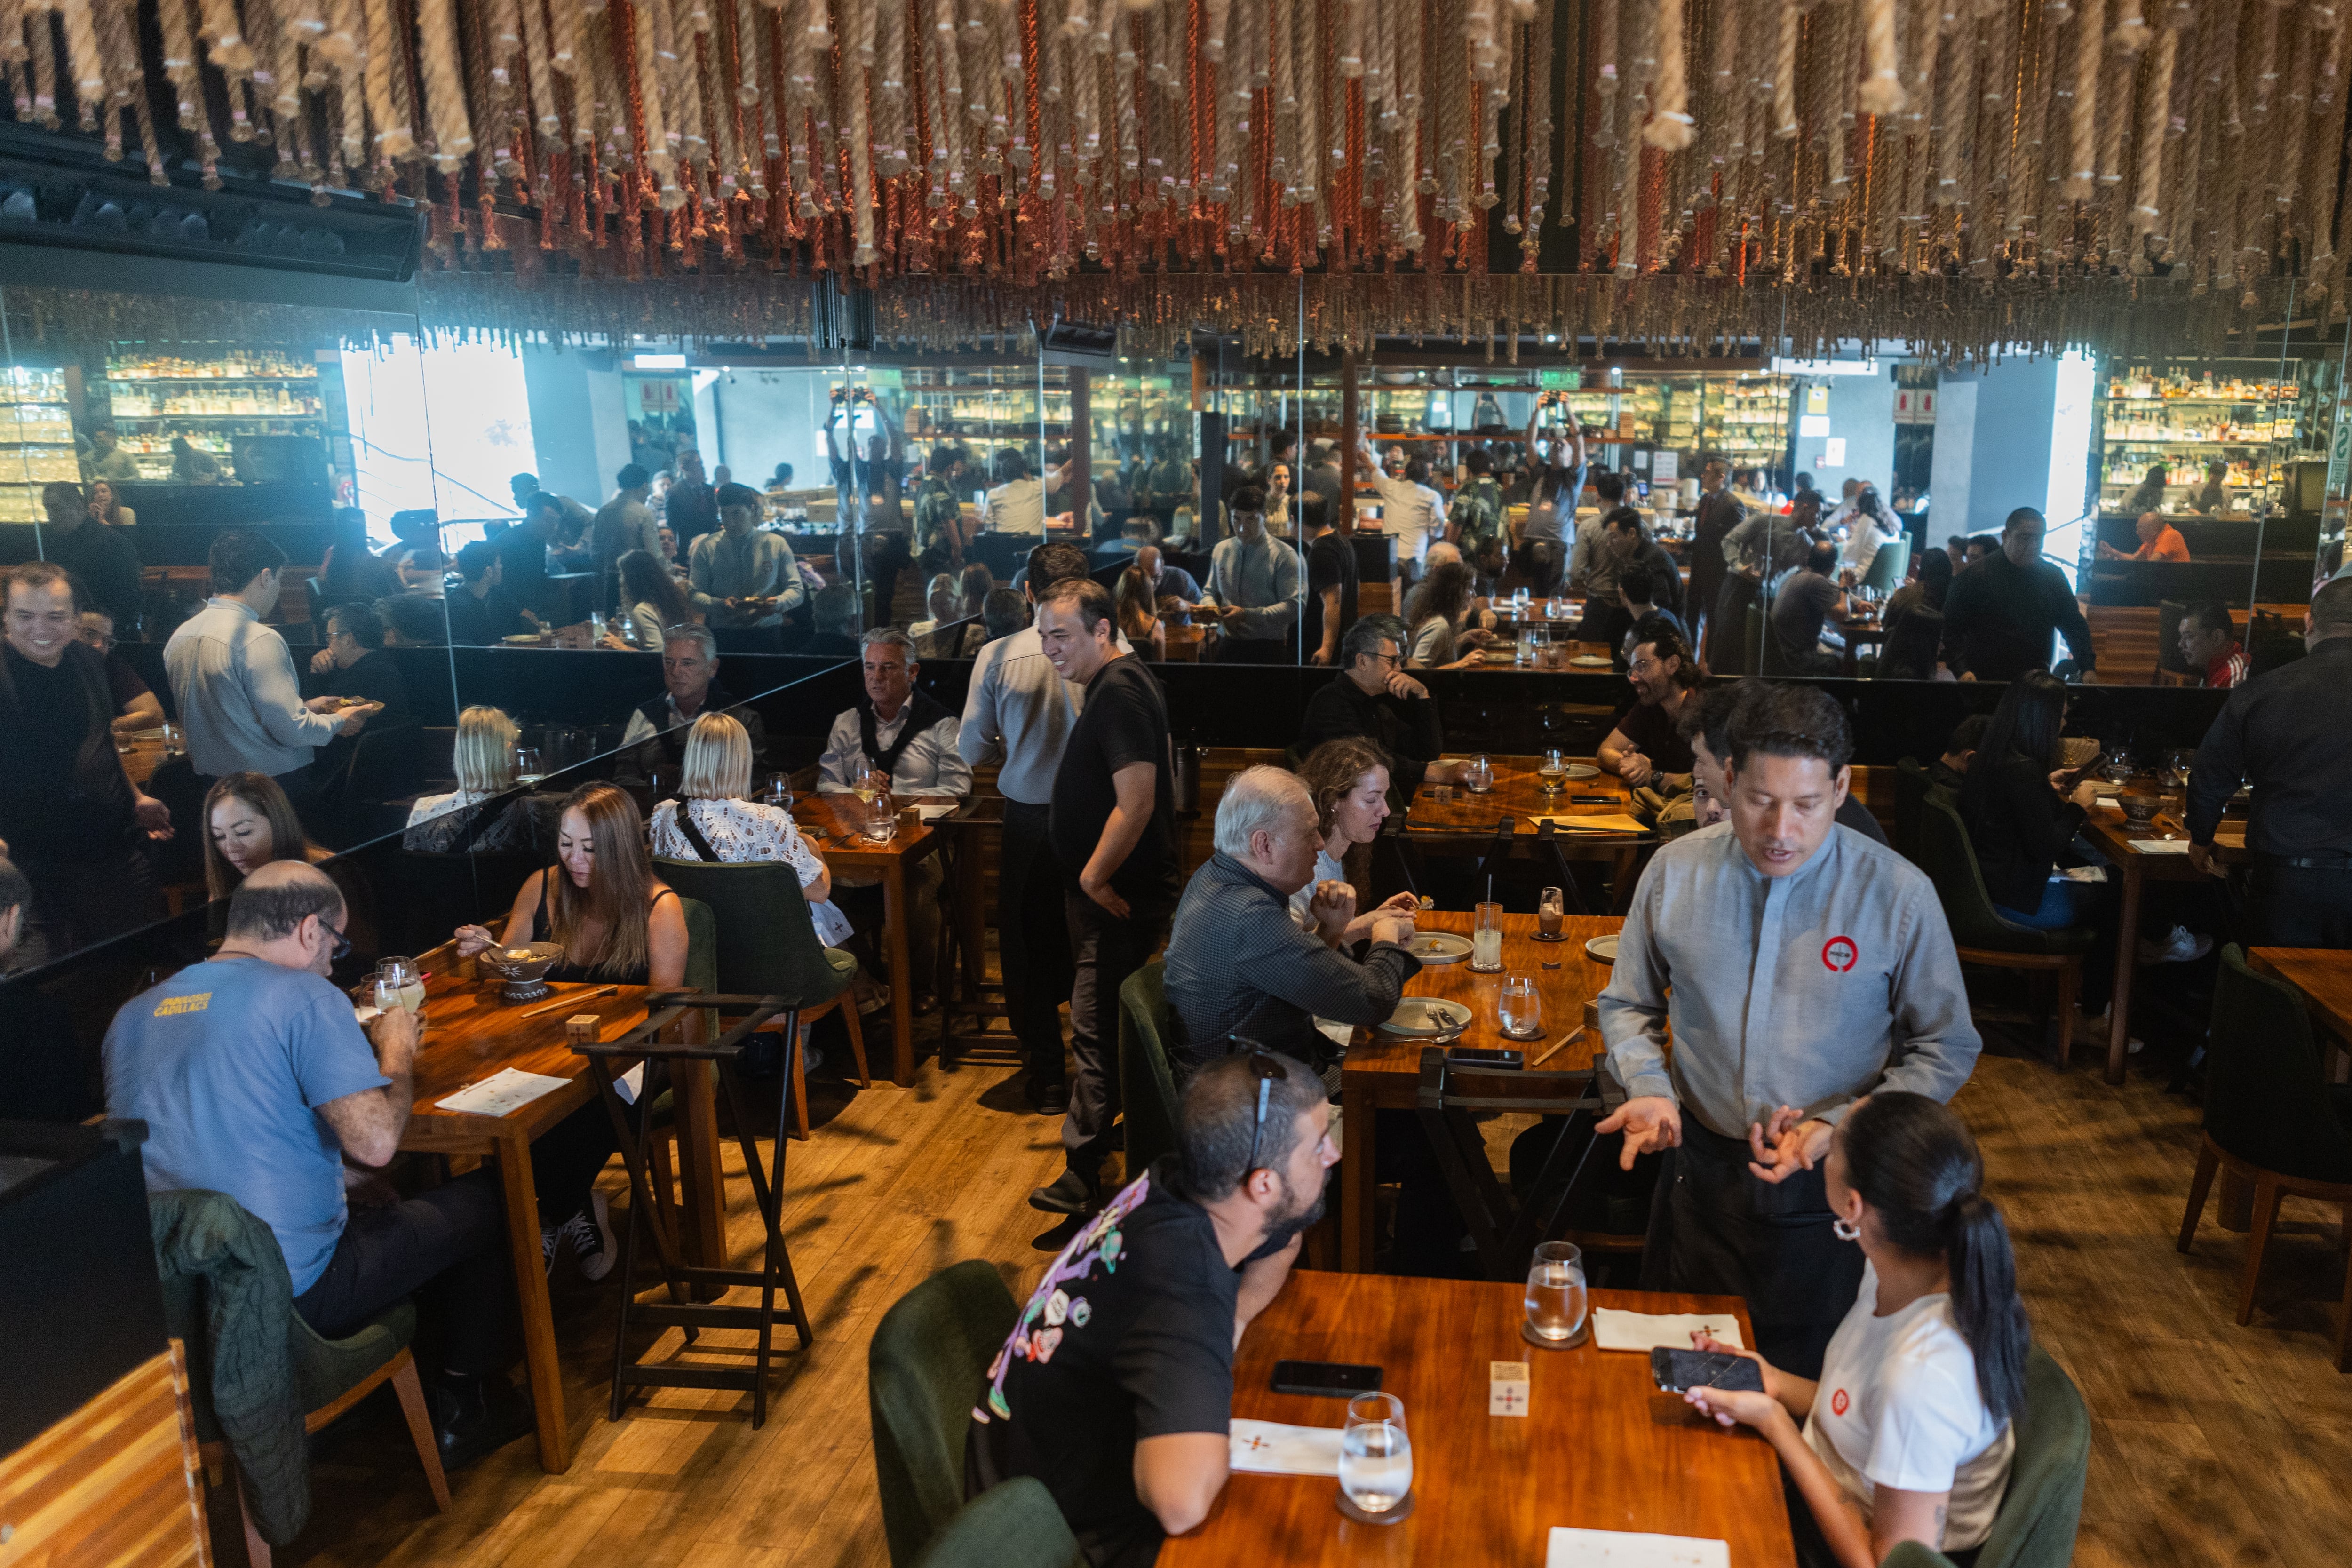 Diners at Maido restaurant sit under a ceiling decoration made from 1,000 ropes from fishing boats.